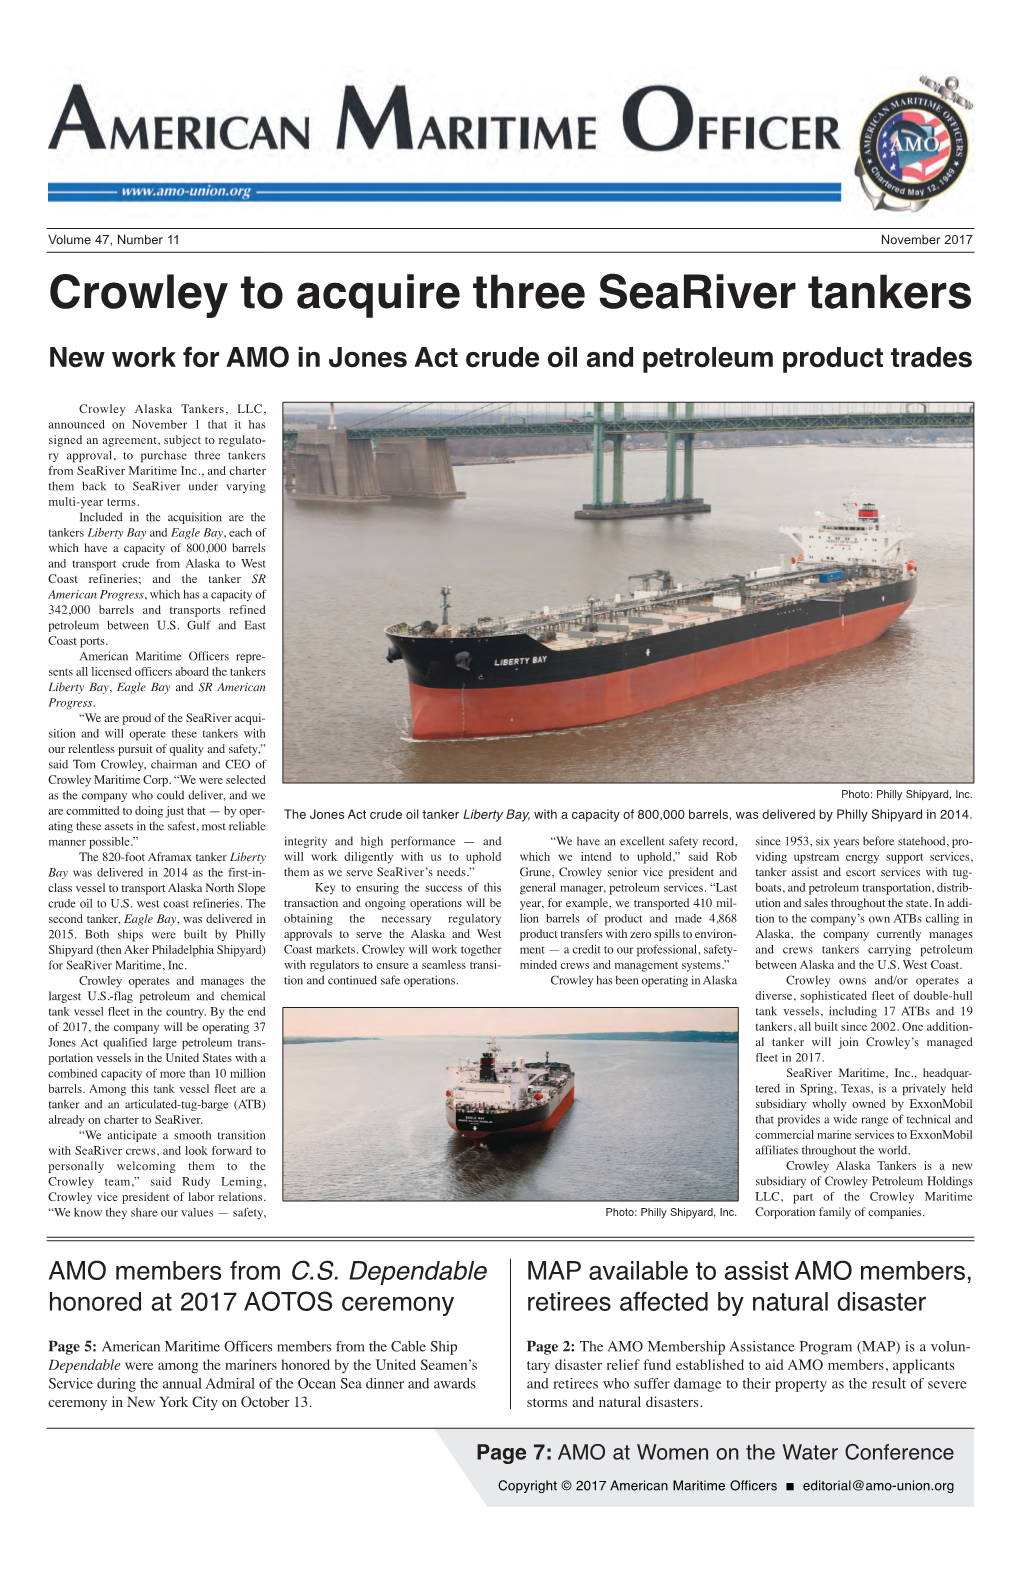 Crowley to Acquire Three Seariver Tankers New Work for AMO in Jones Act Crude Oil and Petroleum Product Trades